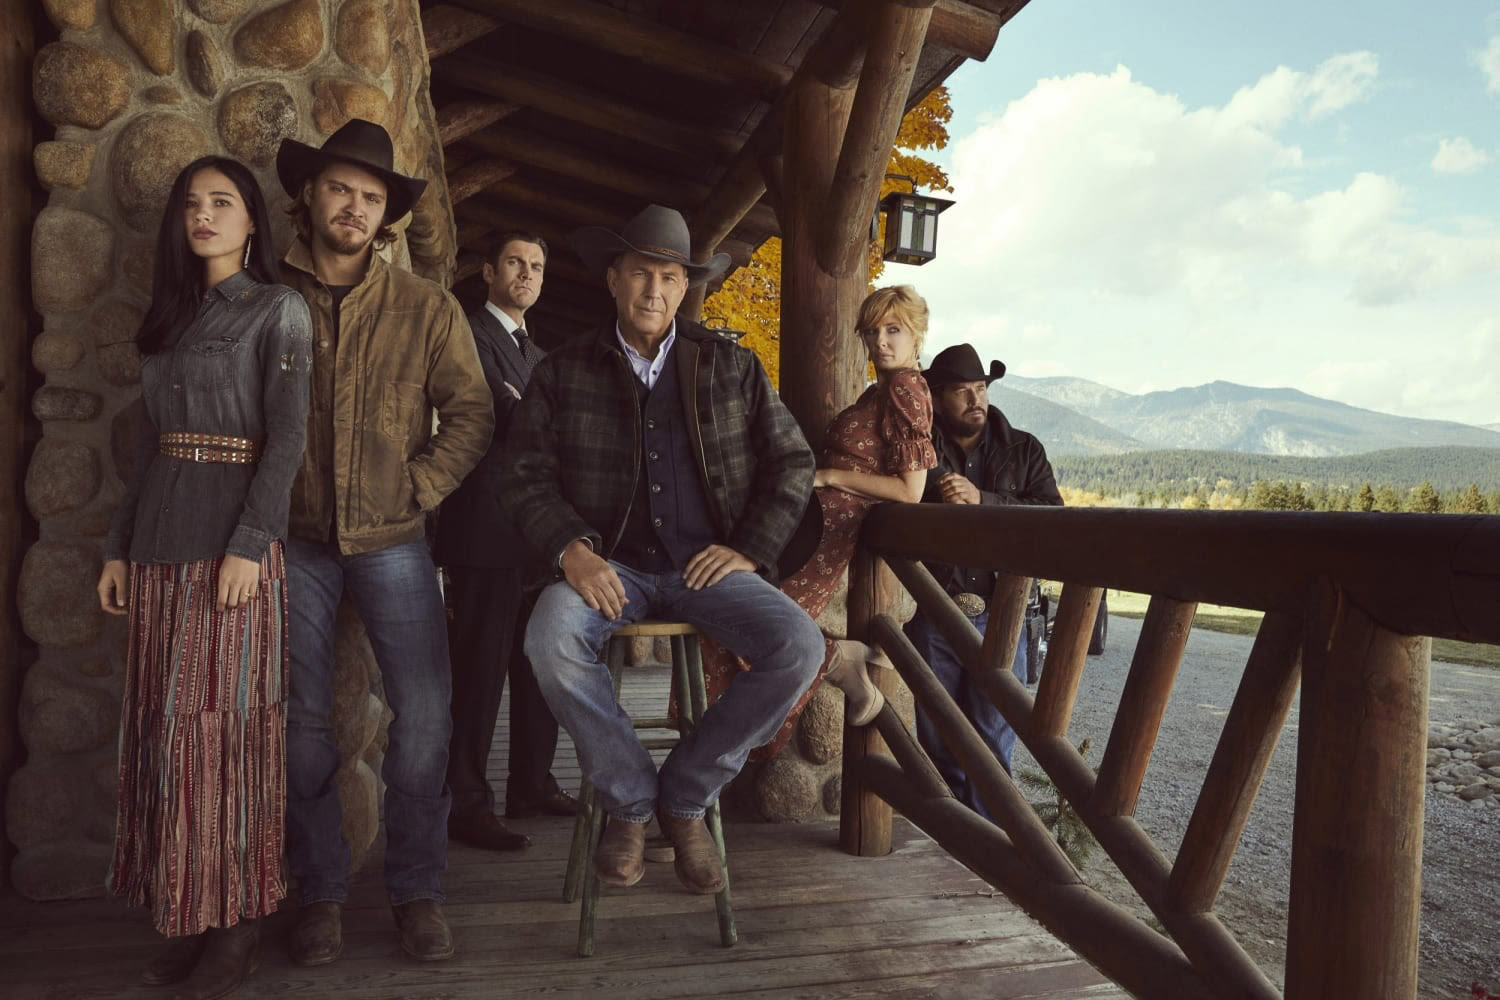 Yellowstone: Taylor Sheridan’s Matthew McConaughey Led Sequel Might Hit Television Record for Per Episode Salary But...